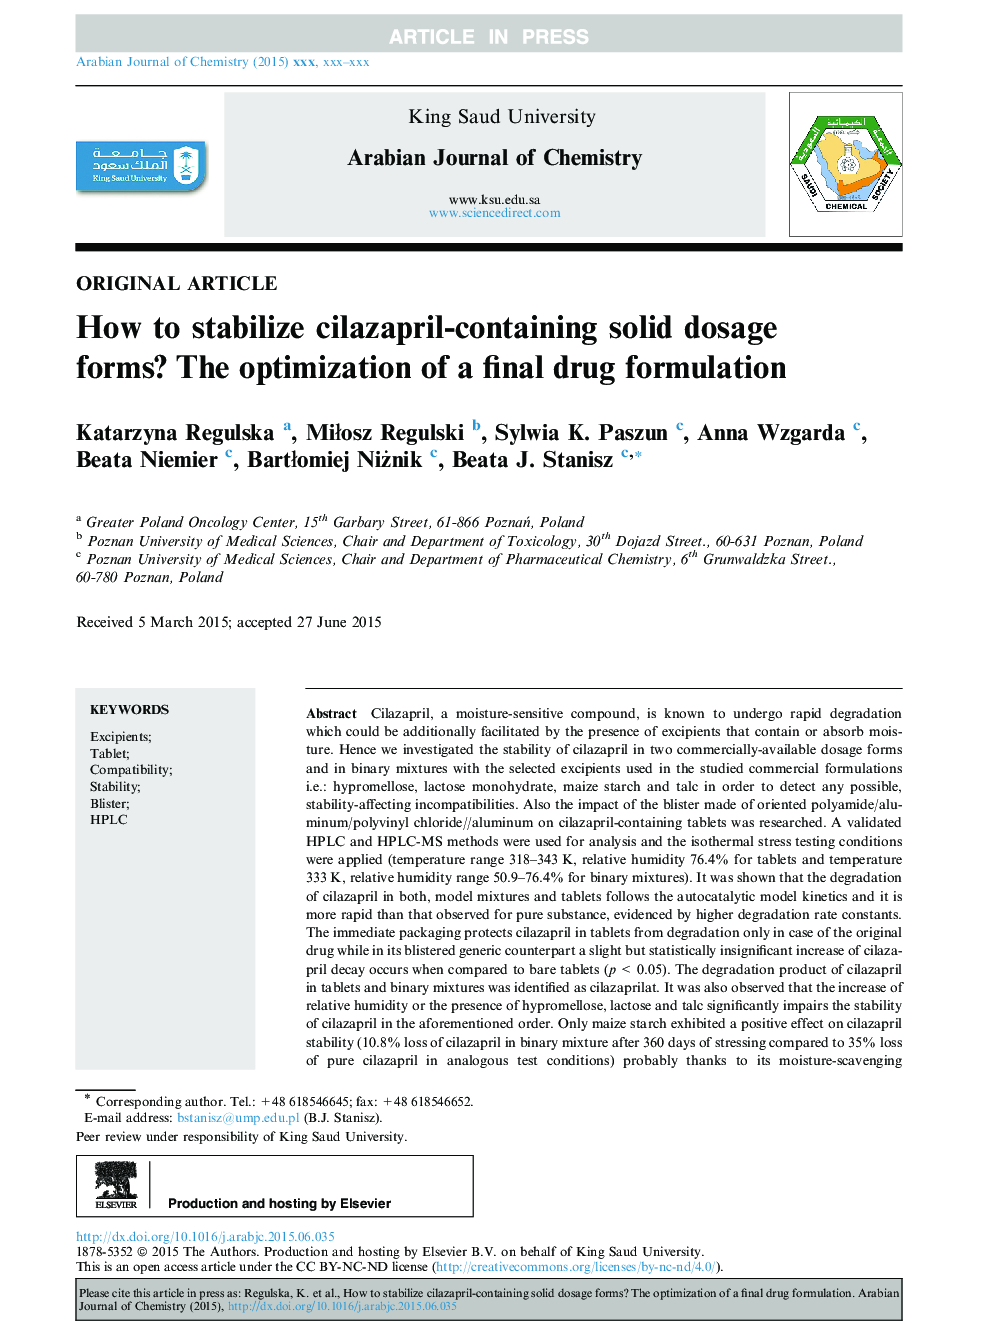 How to stabilize cilazapril-containing solid dosage forms? The optimization of a final drug formulation